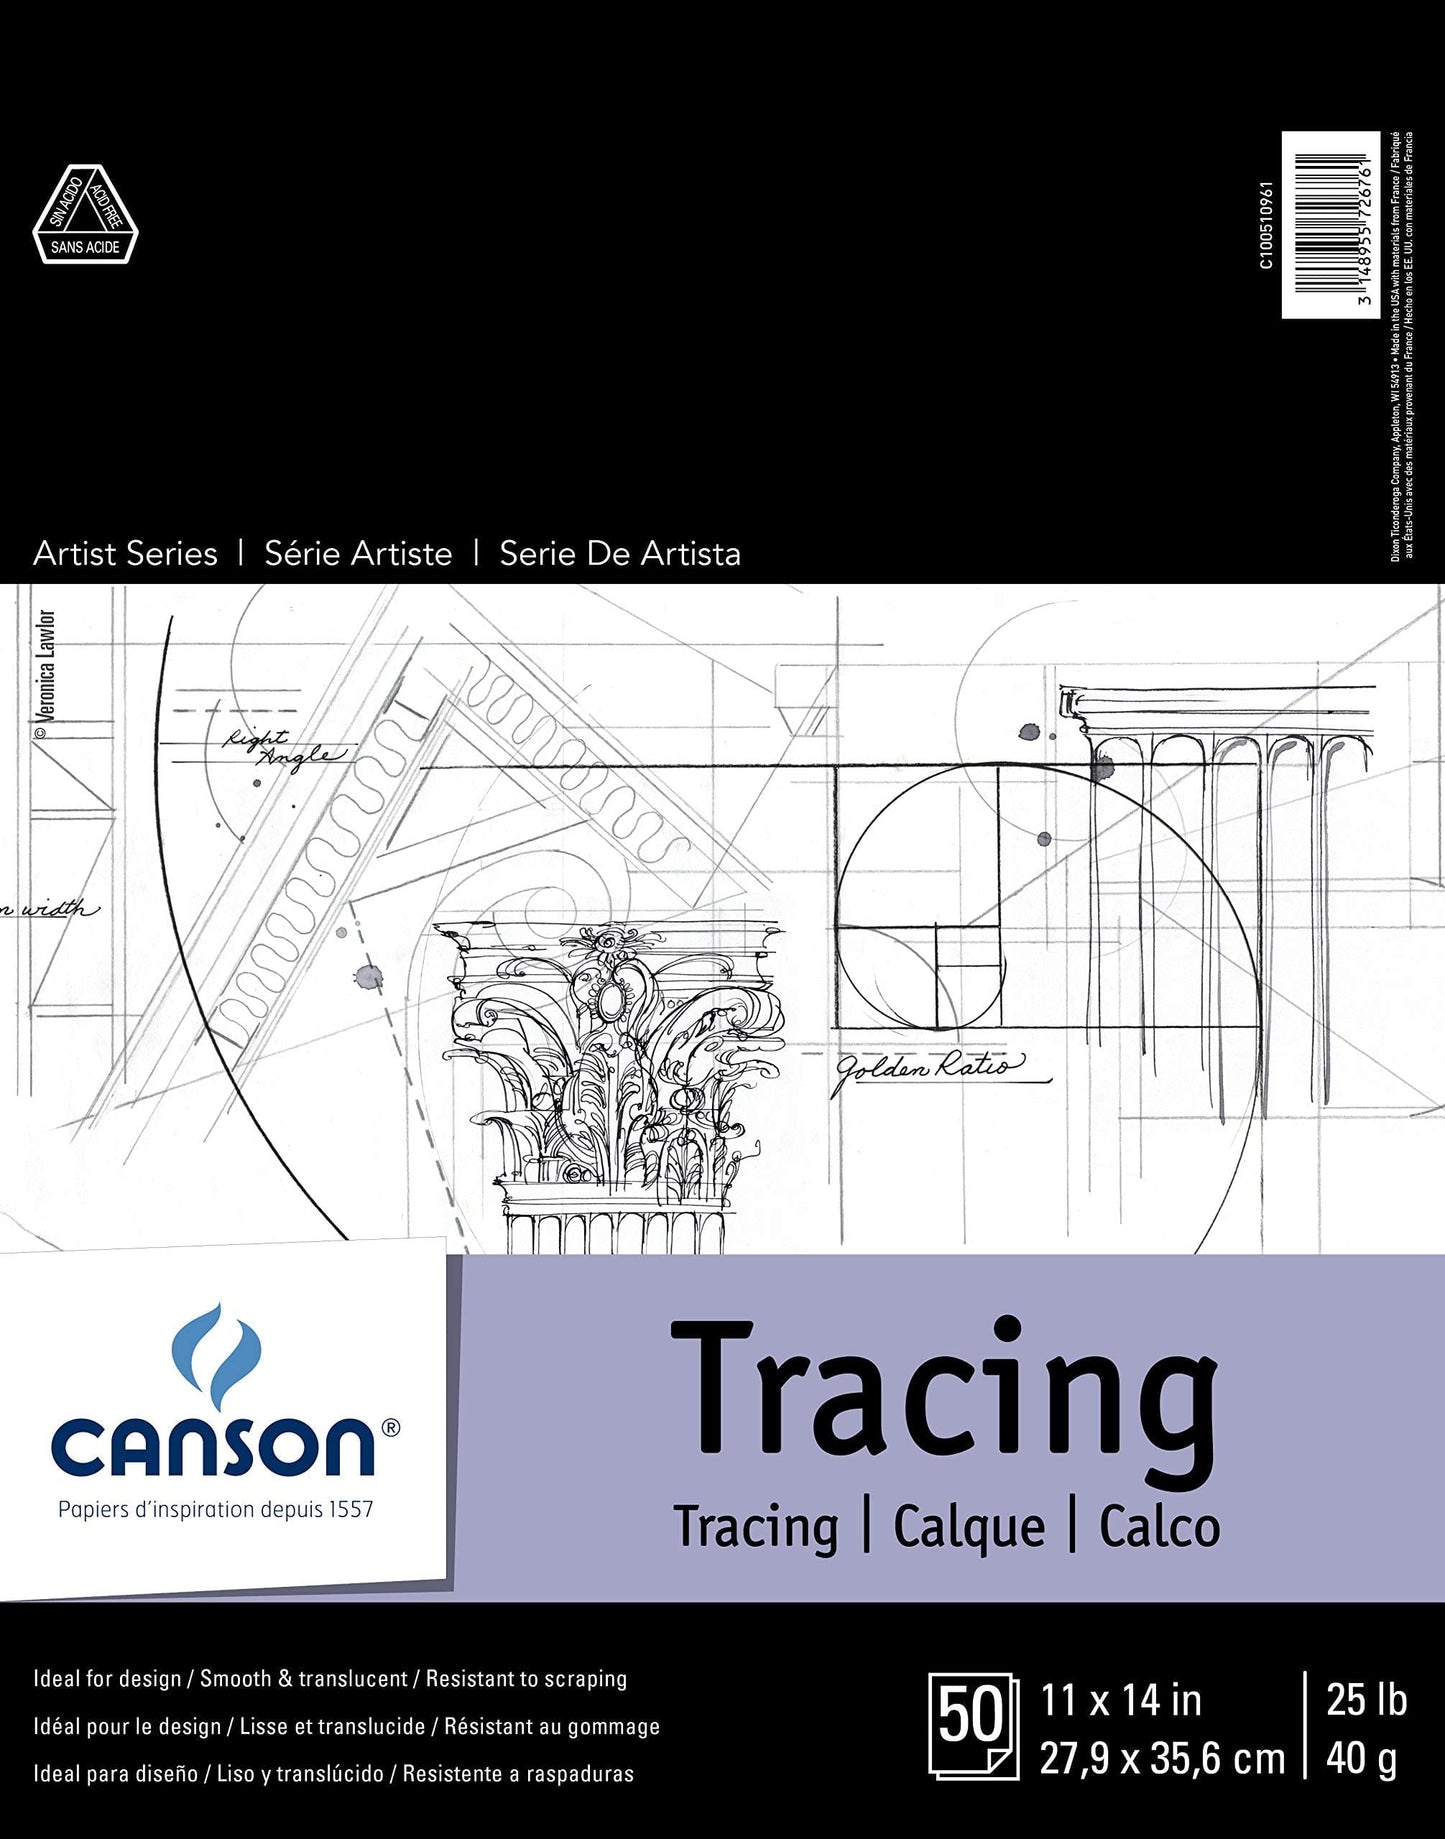 Canson Tracing Pad Canson - Artist Series - Tracing Pad - 11x14" - Item #100510961